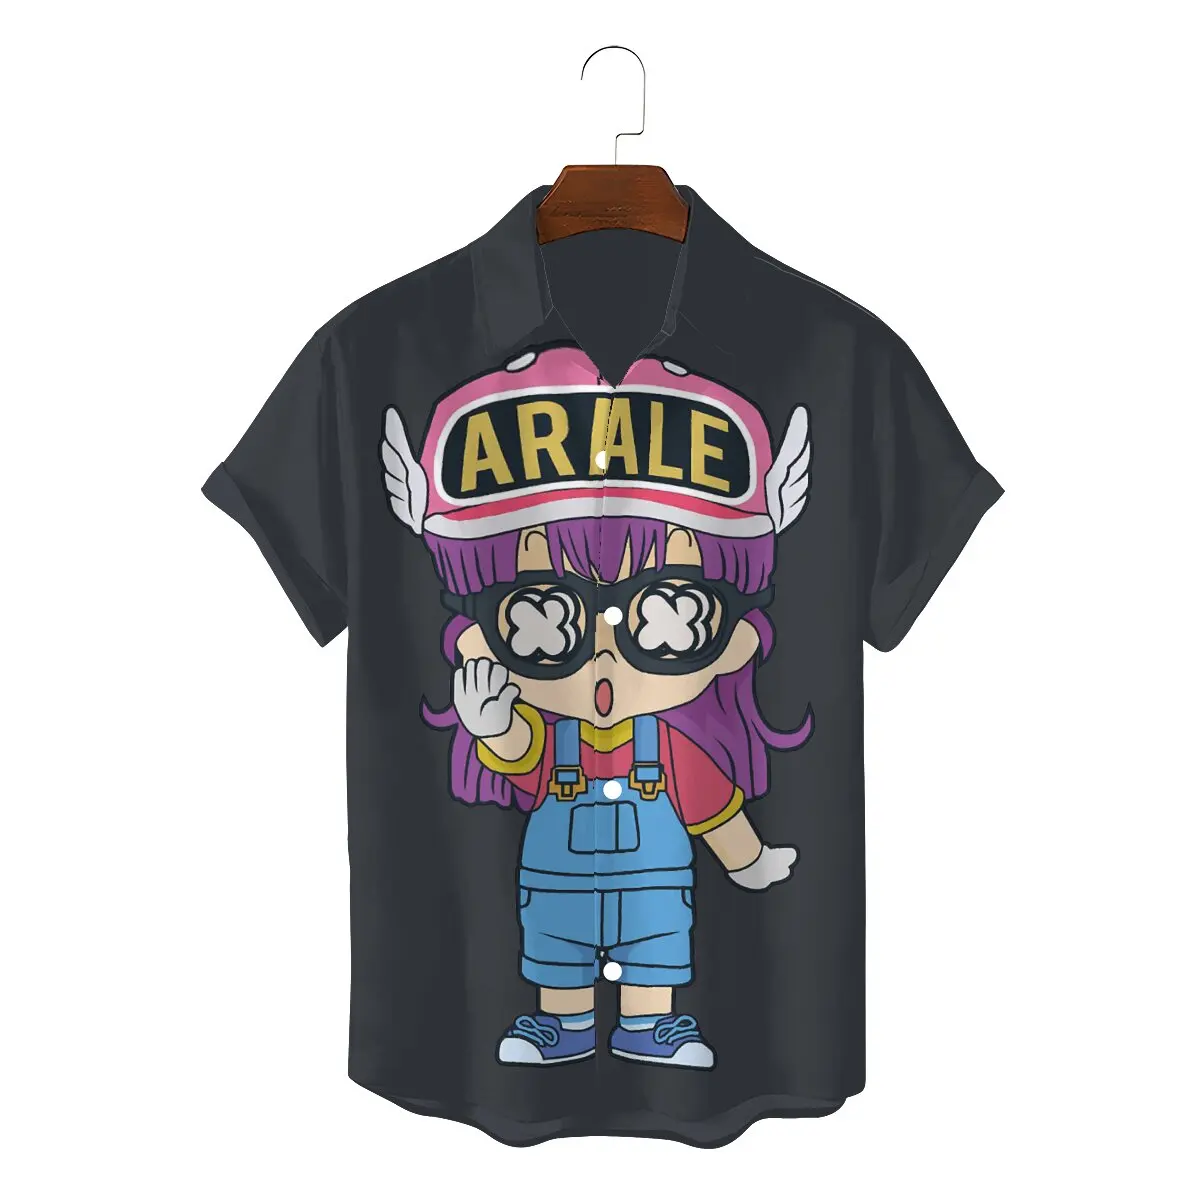 

Arale With Glasses Special 3D Shirt Dr Slump Japanese Manga Leisure Hawaii Shirts Hot Sale T-shirt For Men Women